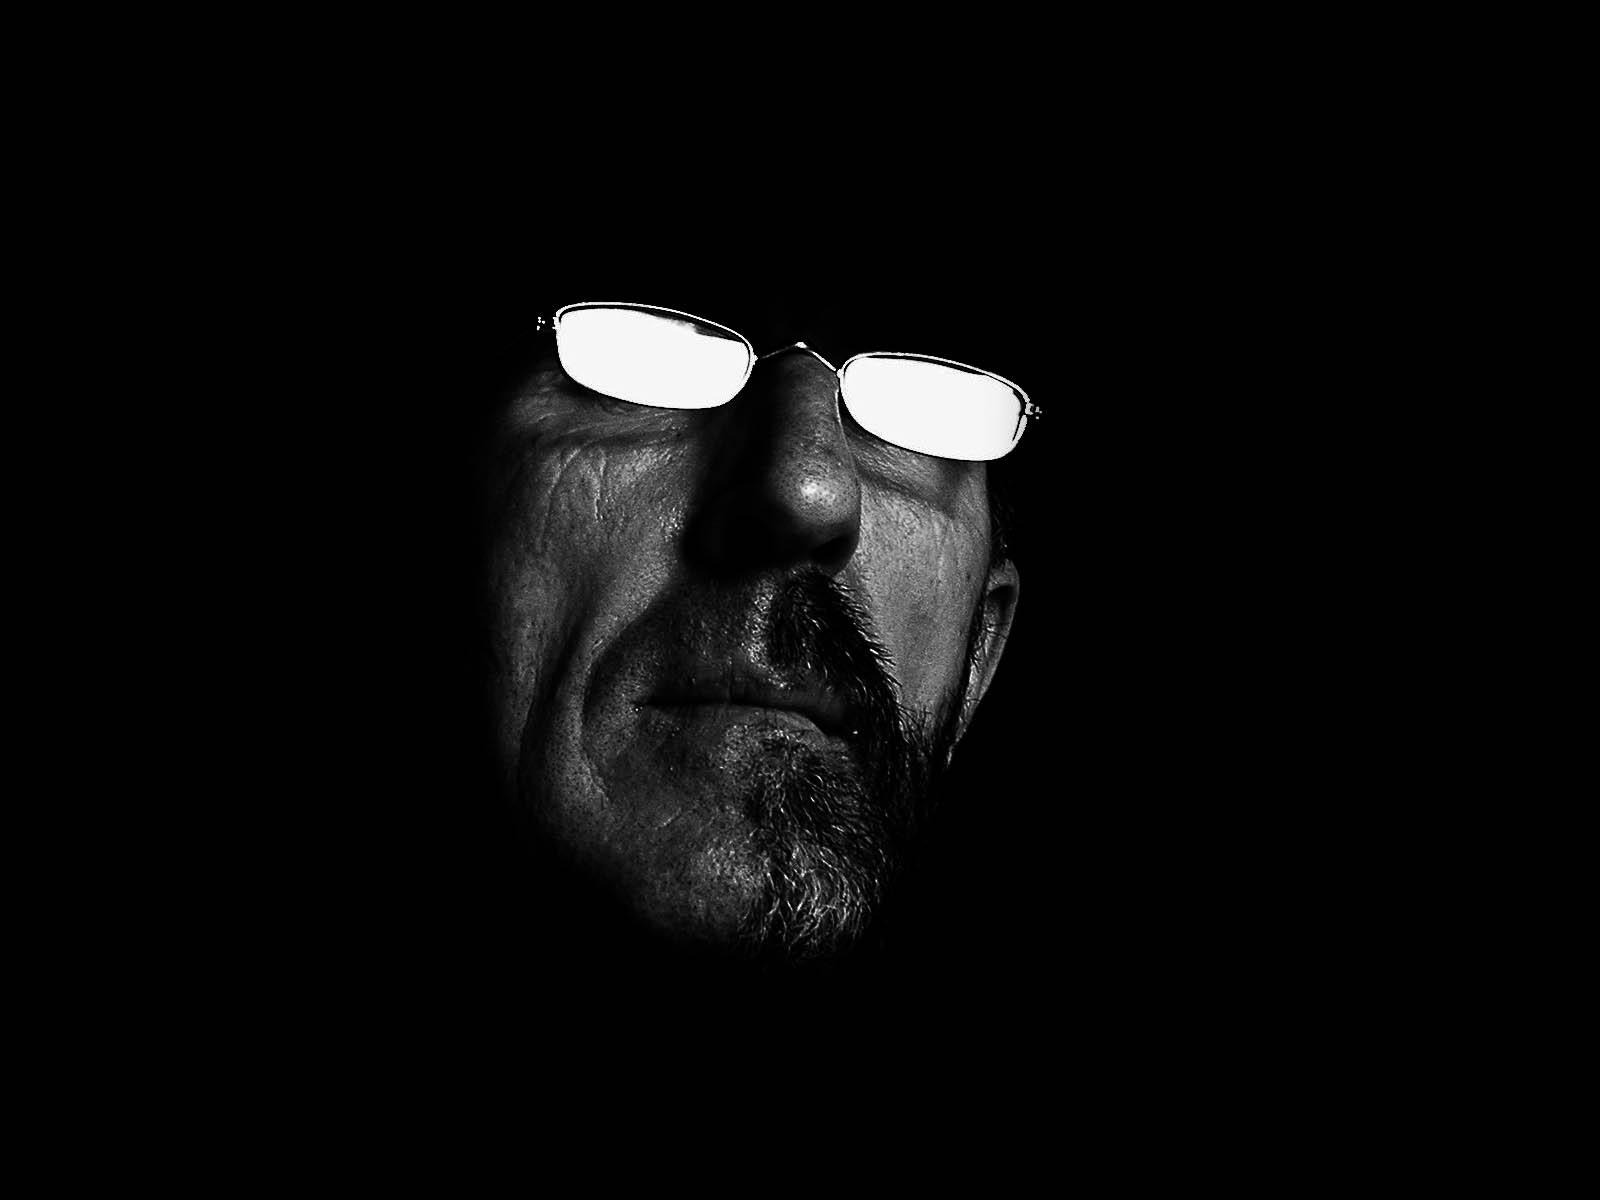 a man's eyes are covered by glowing glasses